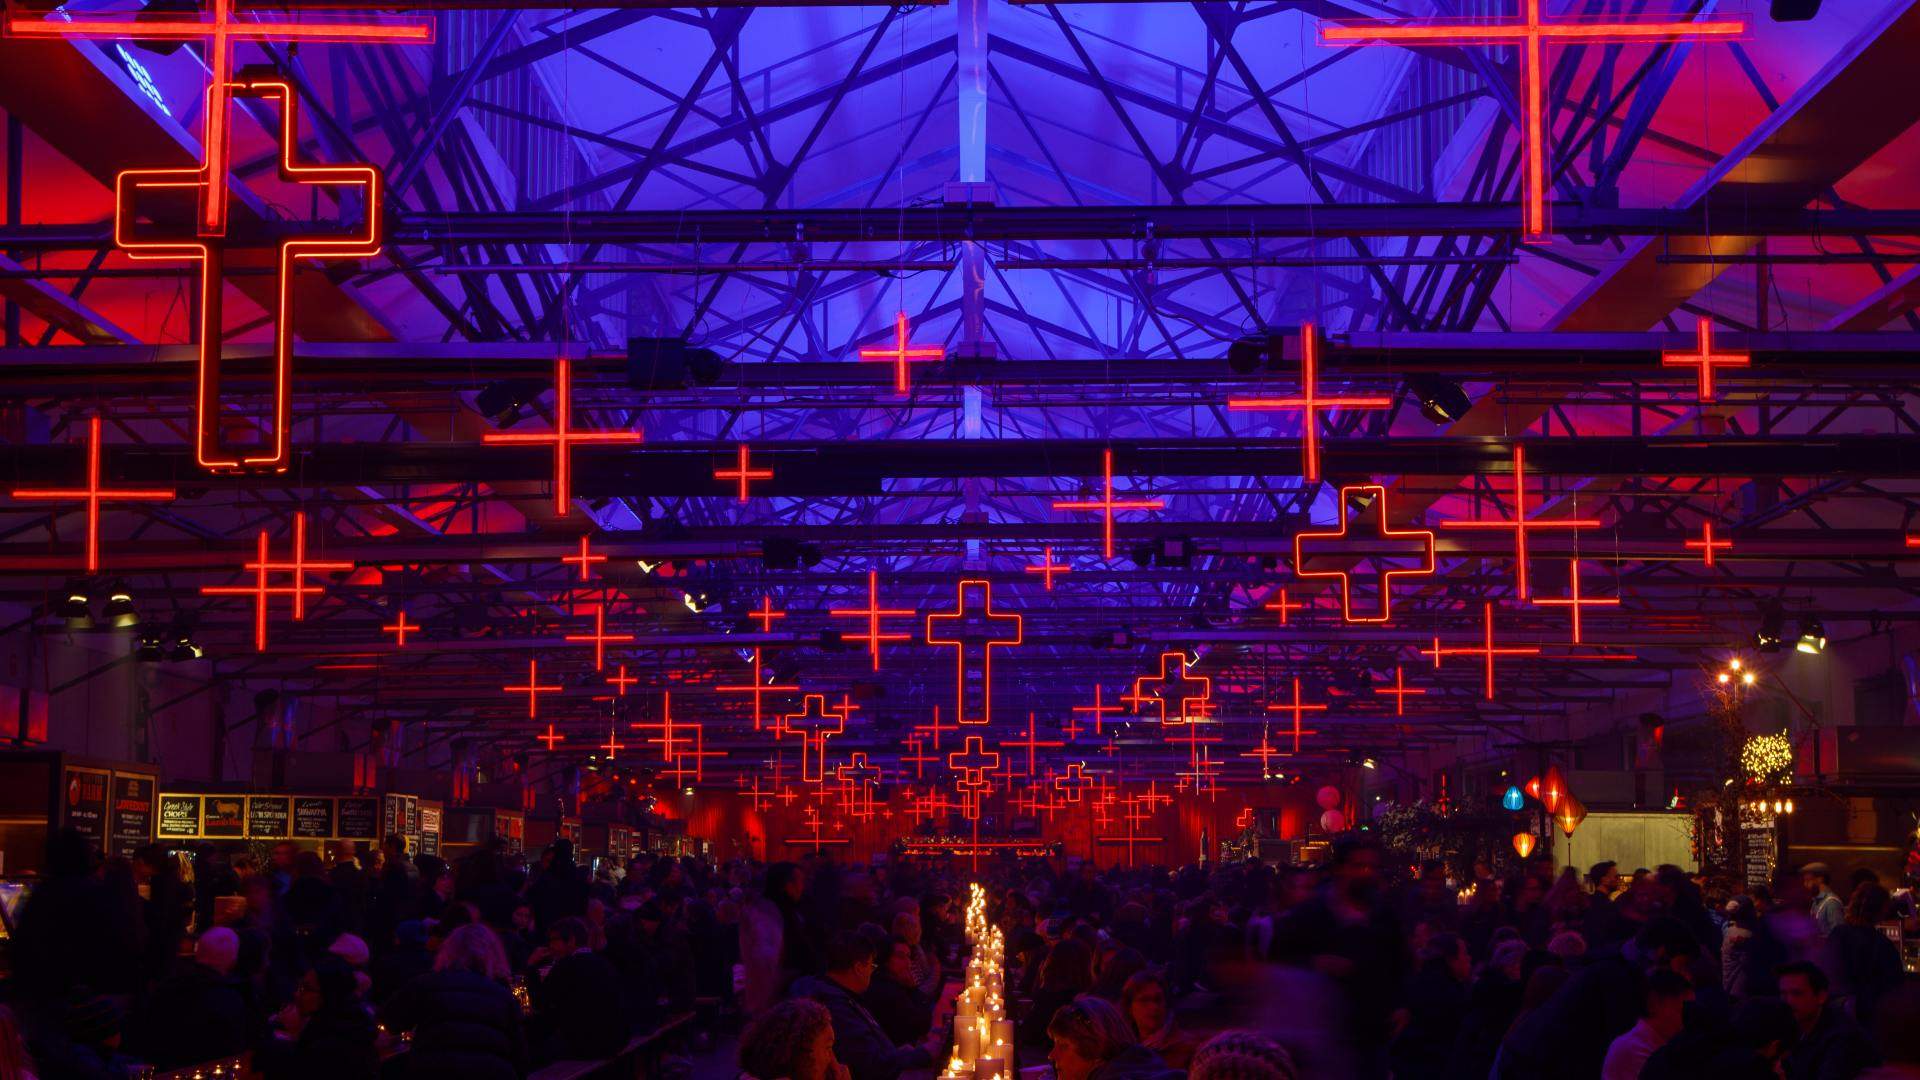 Dark Mofo Is Returning in June 2022 If You're Already Thinking About Your Winter Plans